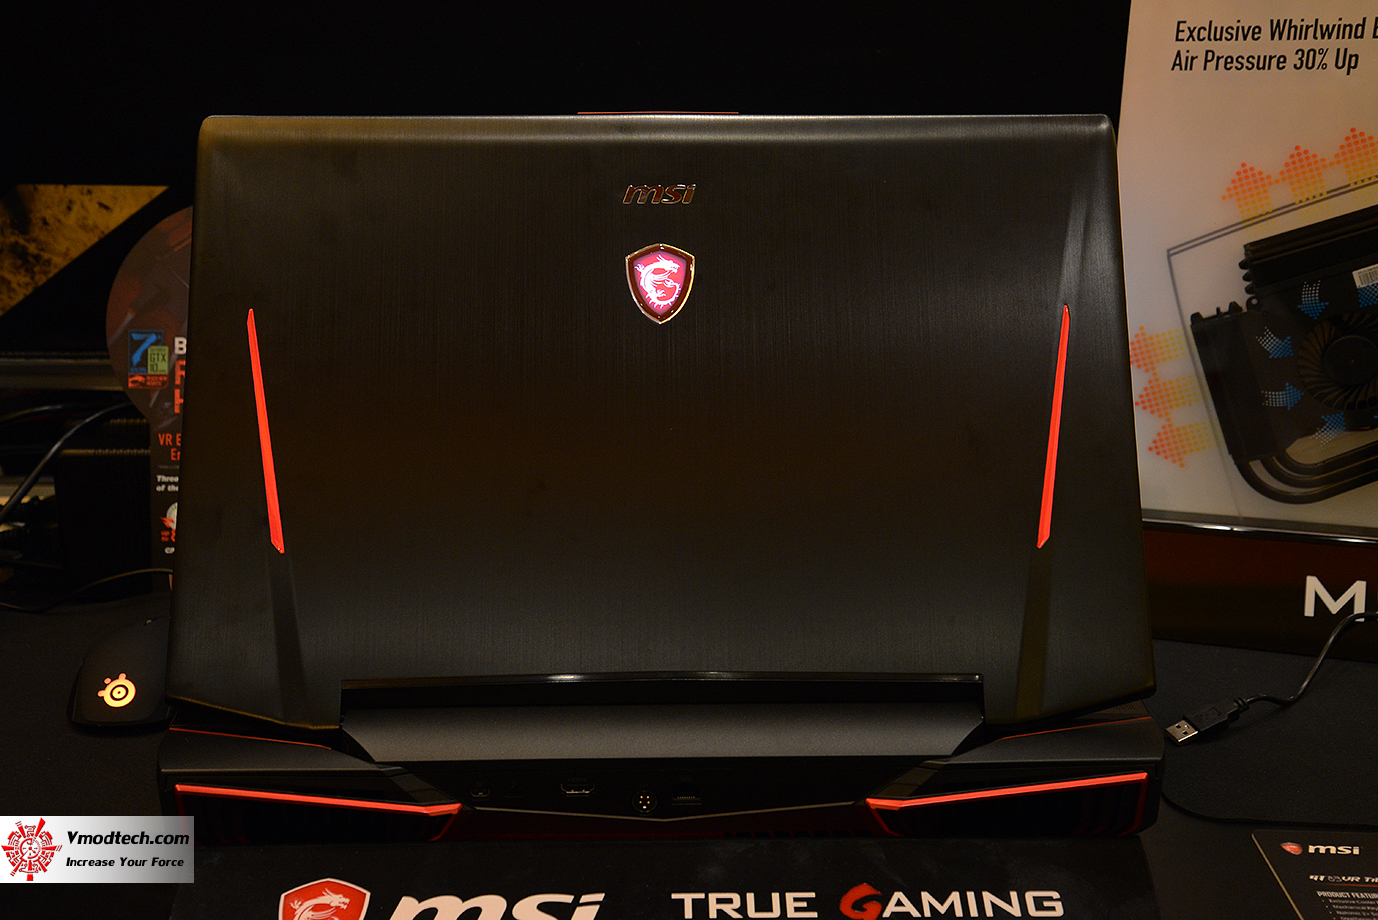 dsc 2076 MSI GAMING NOTEBOOK CES2017 LAS VEGAS PREVIEW